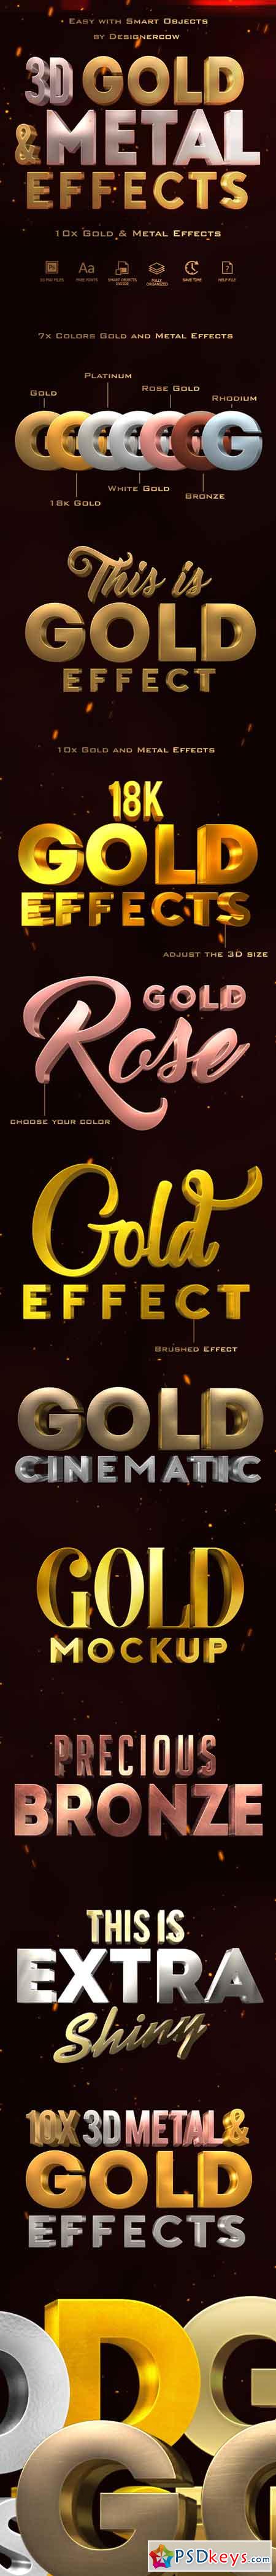 3D Gold and Metal Effects 19406450